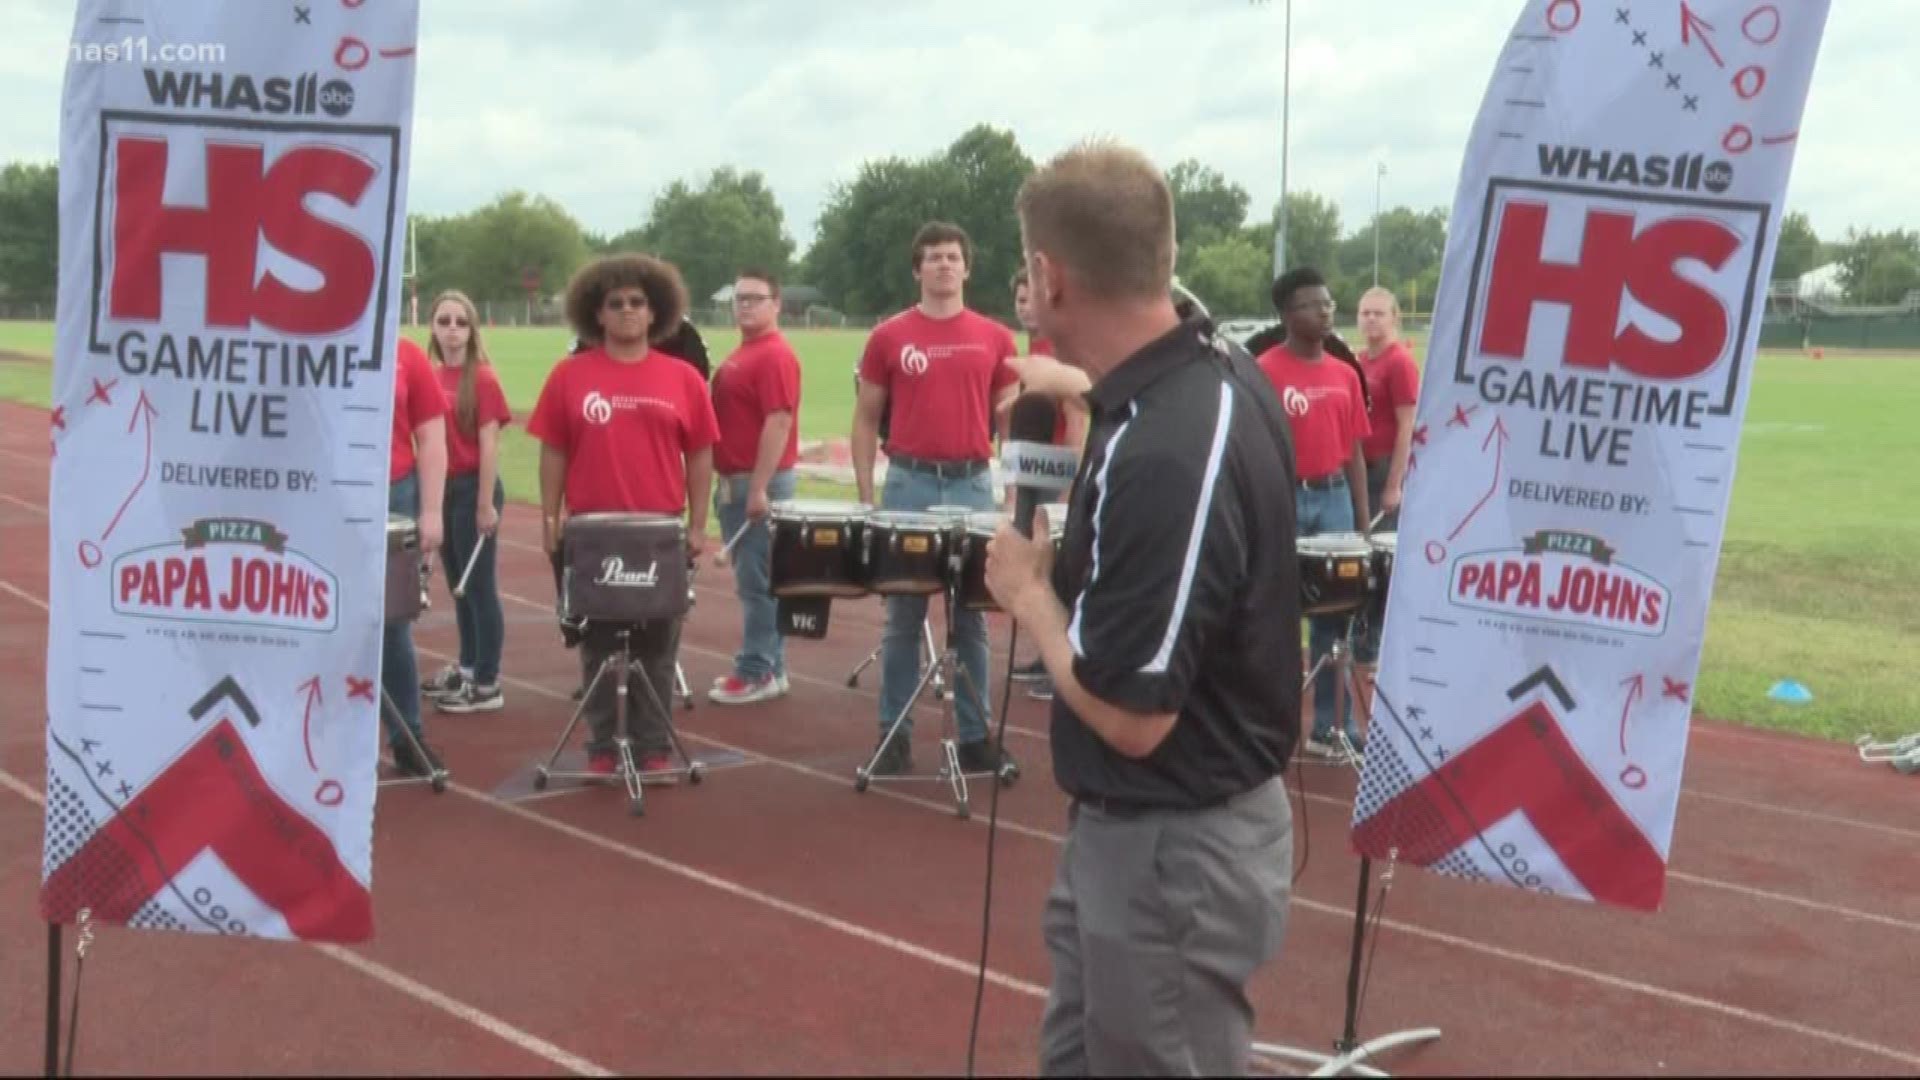 Jeffersonville band plays at HS GameTime Live